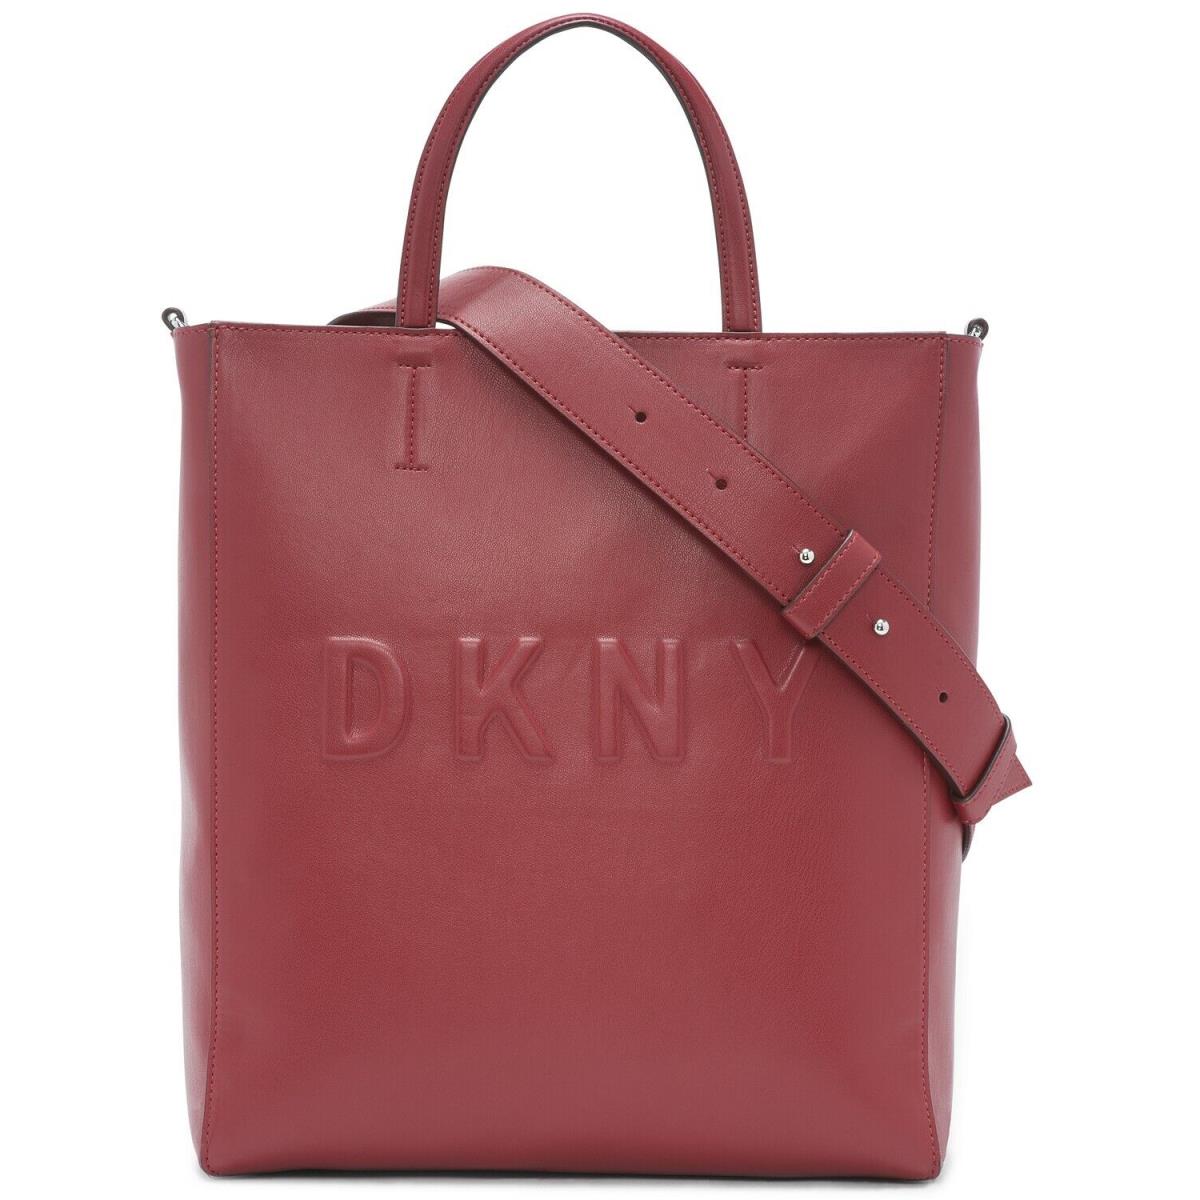 Dkny Tilly Large Tote Red - Exterior: Red